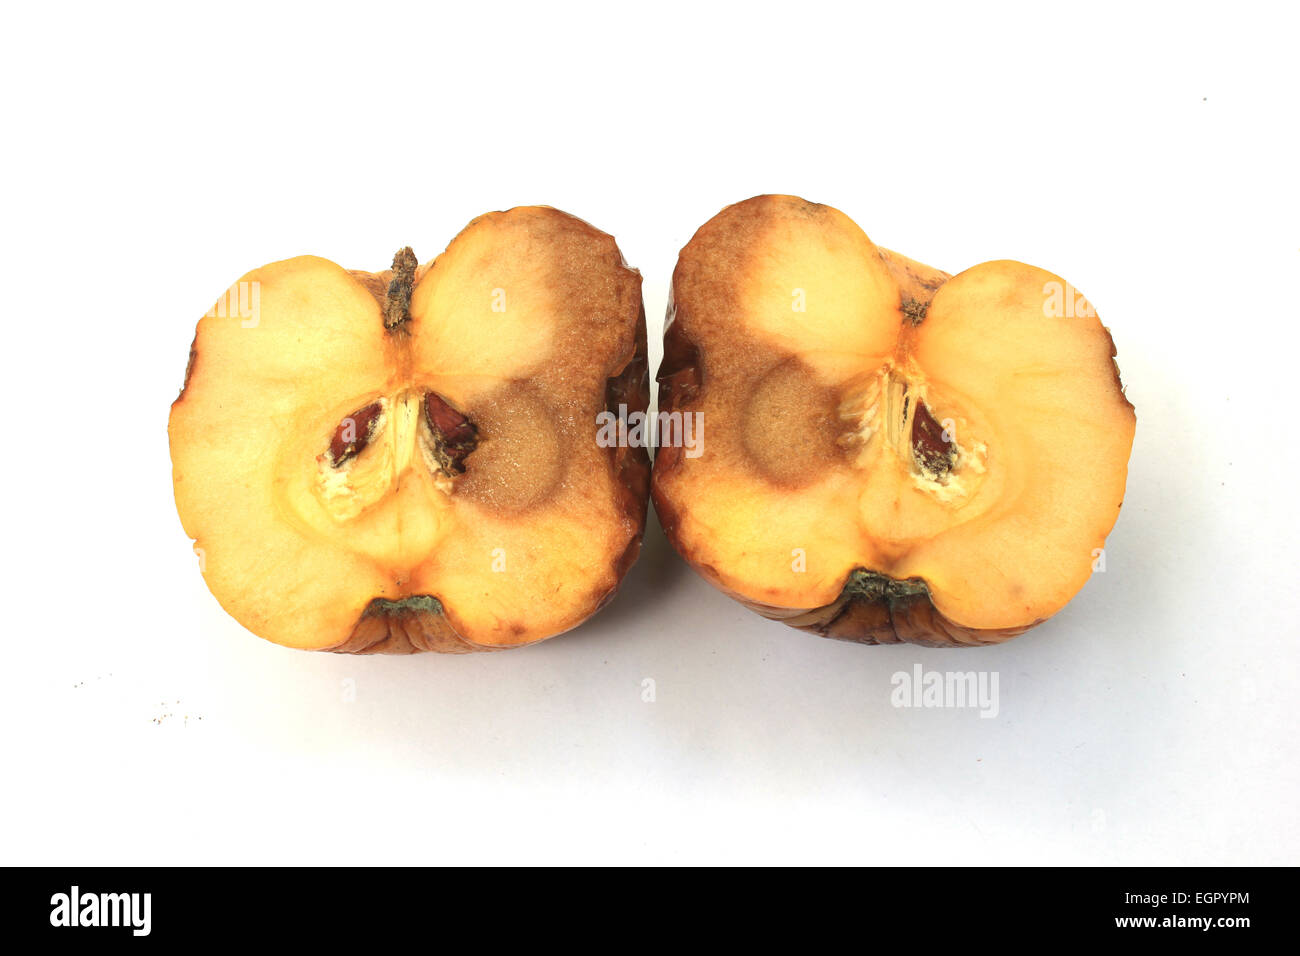 Rotten or decaying apple in white background Stock Photo